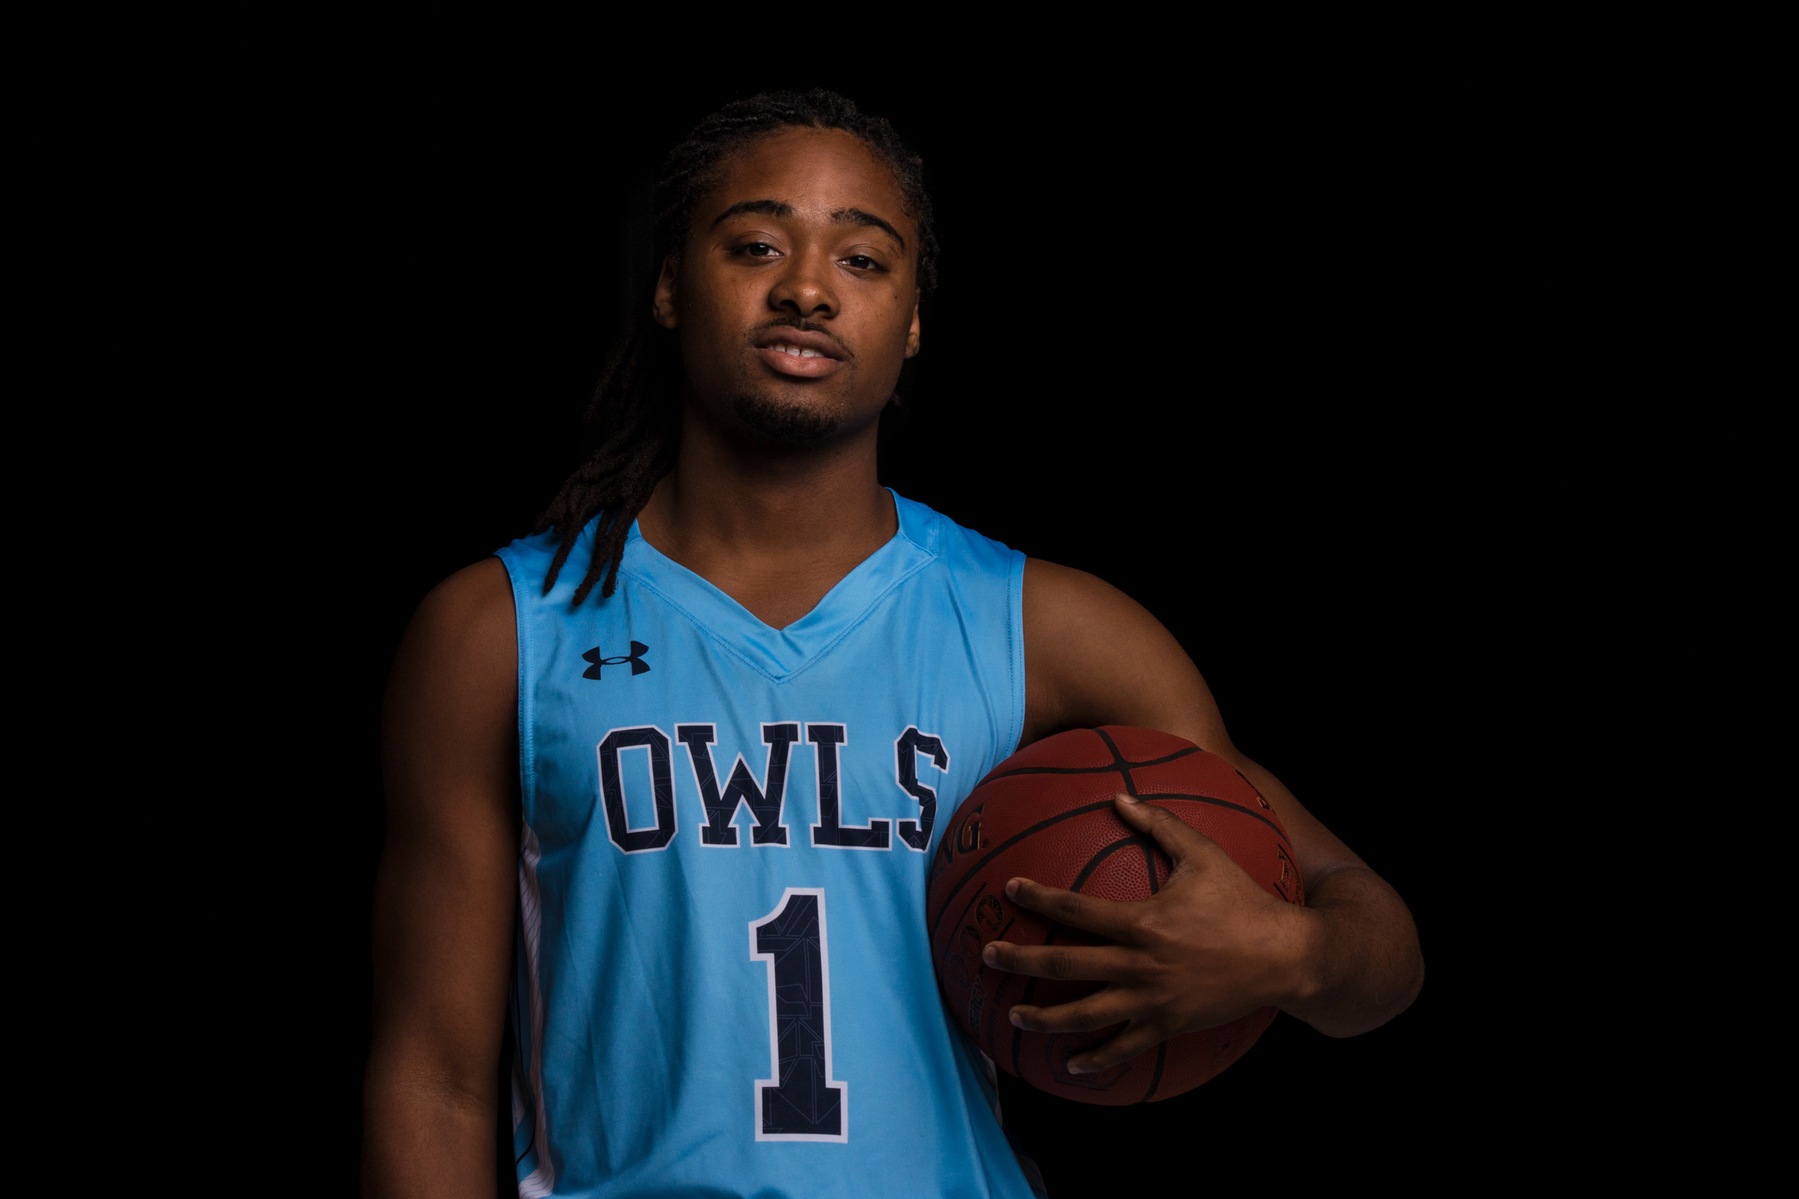 Tunde Scrivner Named NJCAA Division III Player of the Week